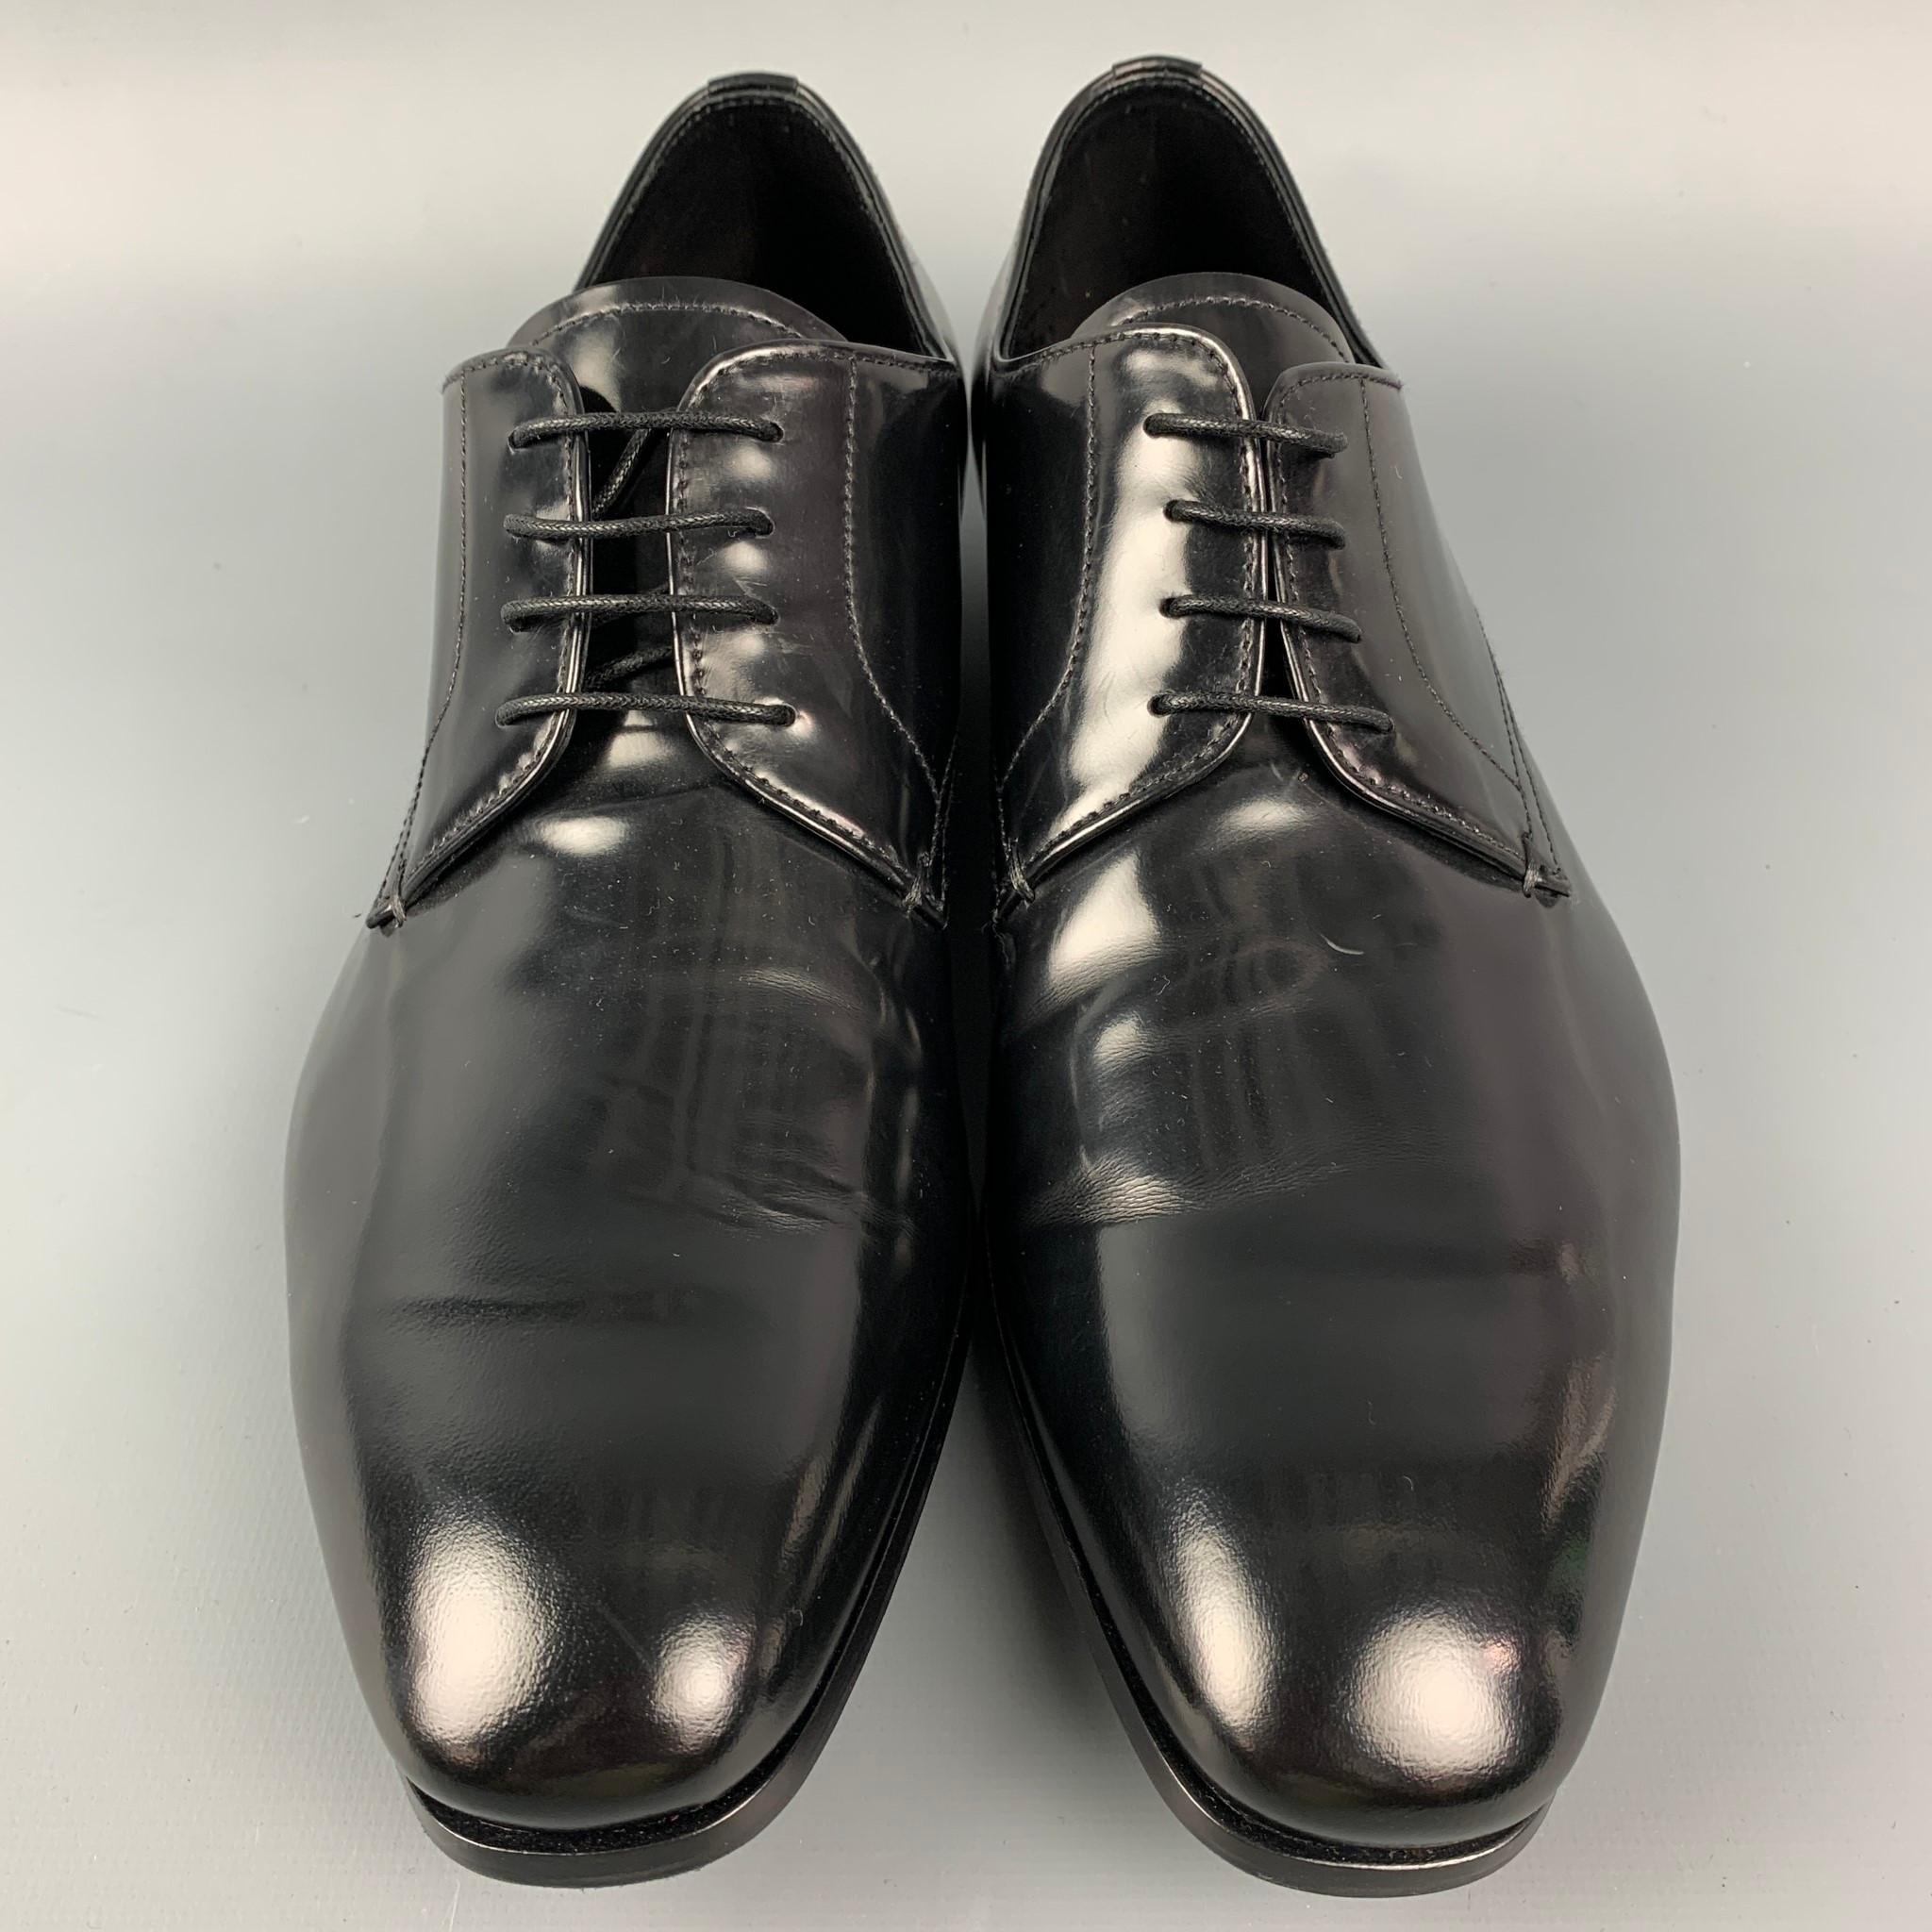 PRADA Size 7 Black Patent Leather Oxford Lace Up Shoes 2